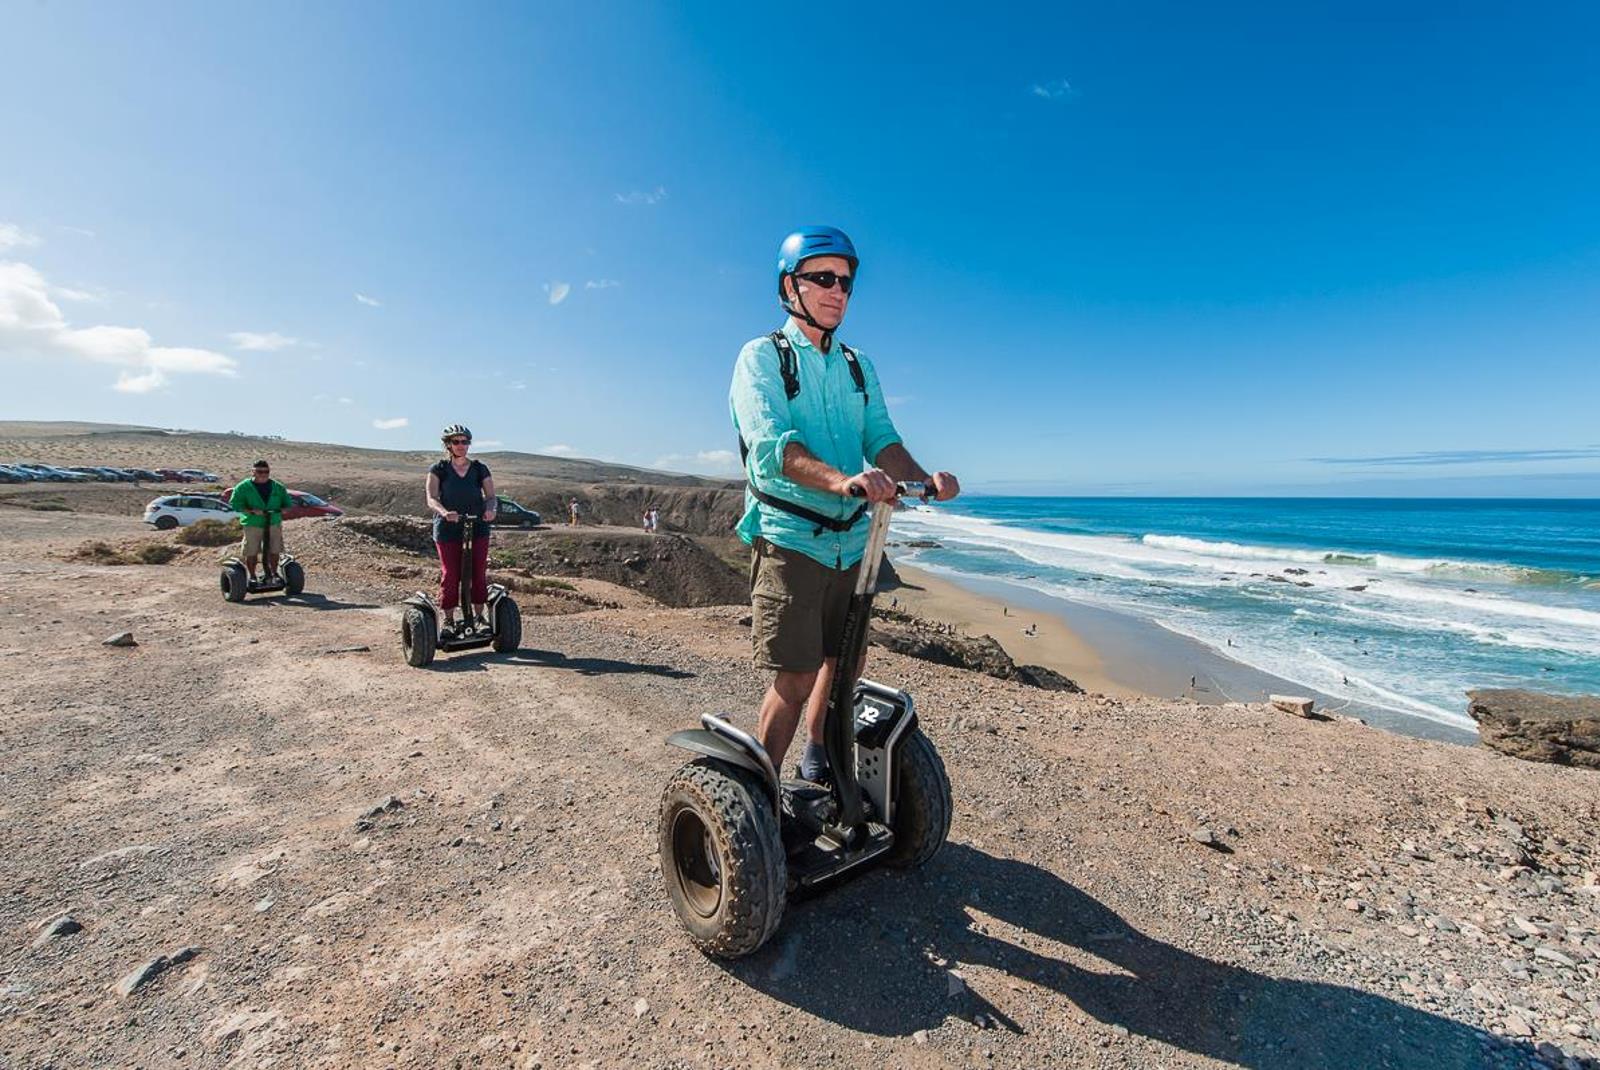 Segway-Tour-from-Playa-de-Jandia-to-Morro-Jable-3